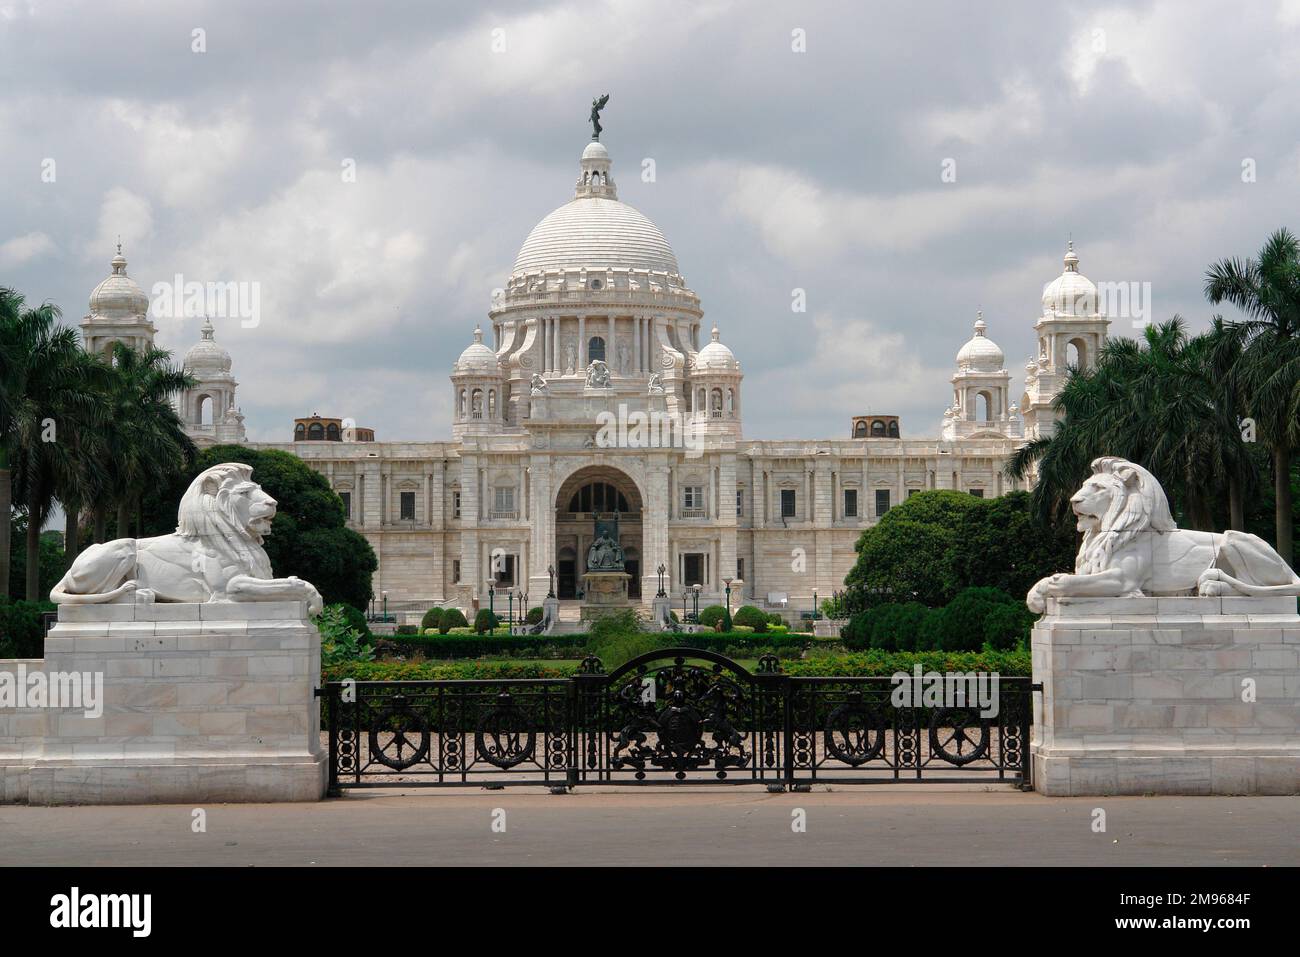 The Victoria Memorial in Kolkata (Calcutta), India.  It was built between 1906 and 1921 as a memorial to Queen Victoria of Great Britain and Empress of India.  The building is now a museum. Stock Photo